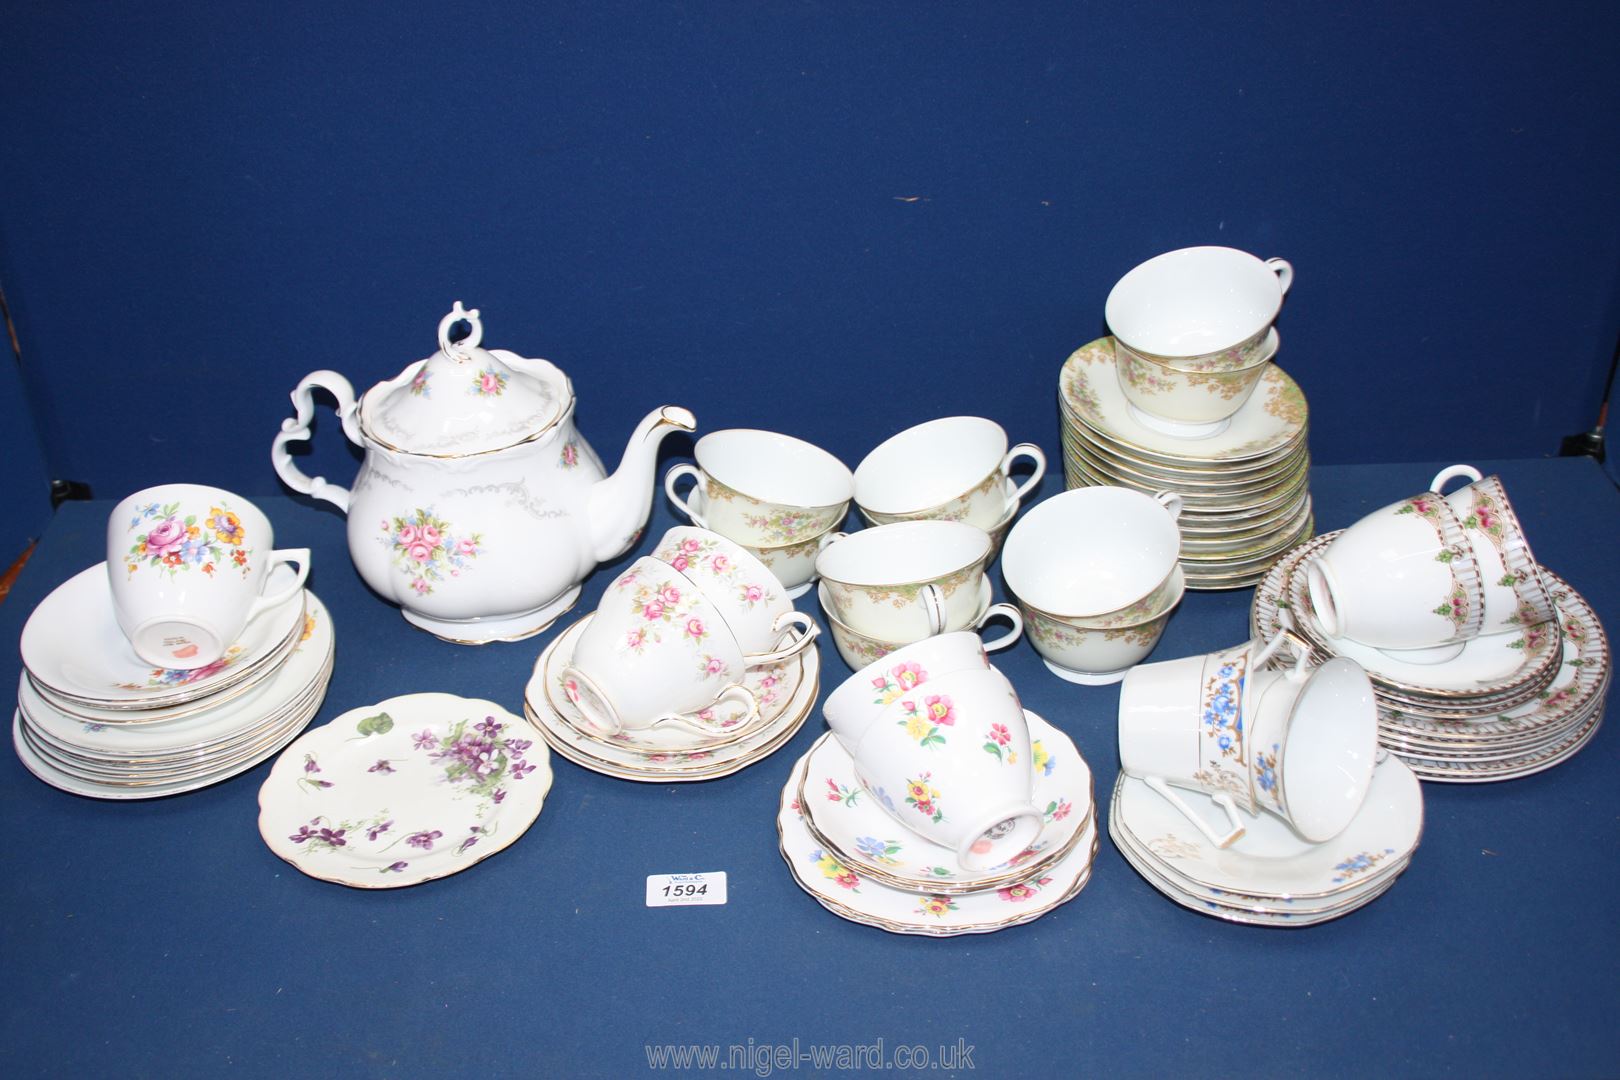 A quantity of china including Royal Albert teapot, Duchess cups and saucers etc.